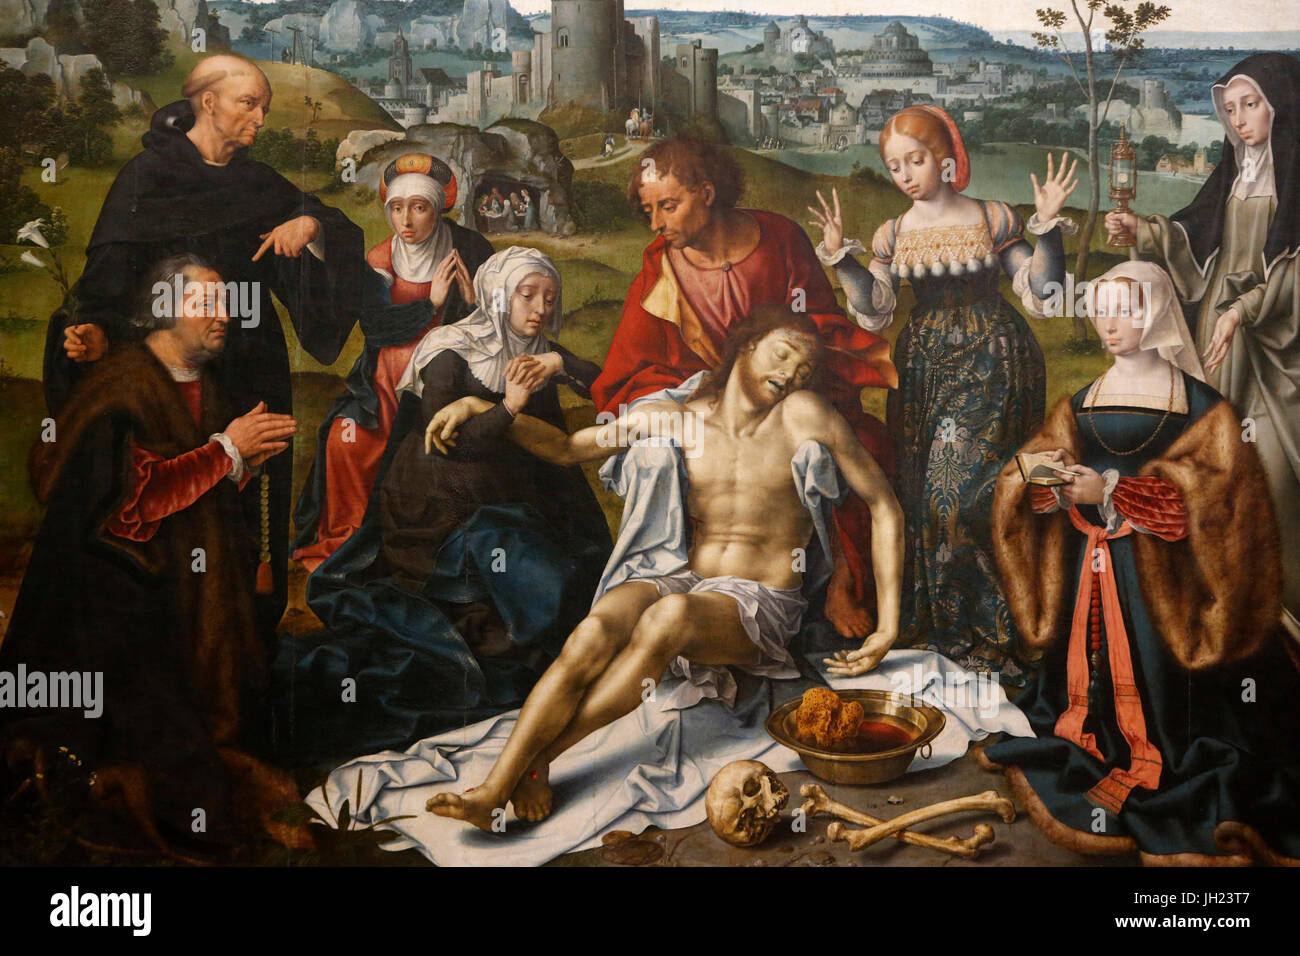 Louvre museum. Altarpiece. Descent from the cross. Joos van Cleve. Towards 1485. France. France. Stock Photo